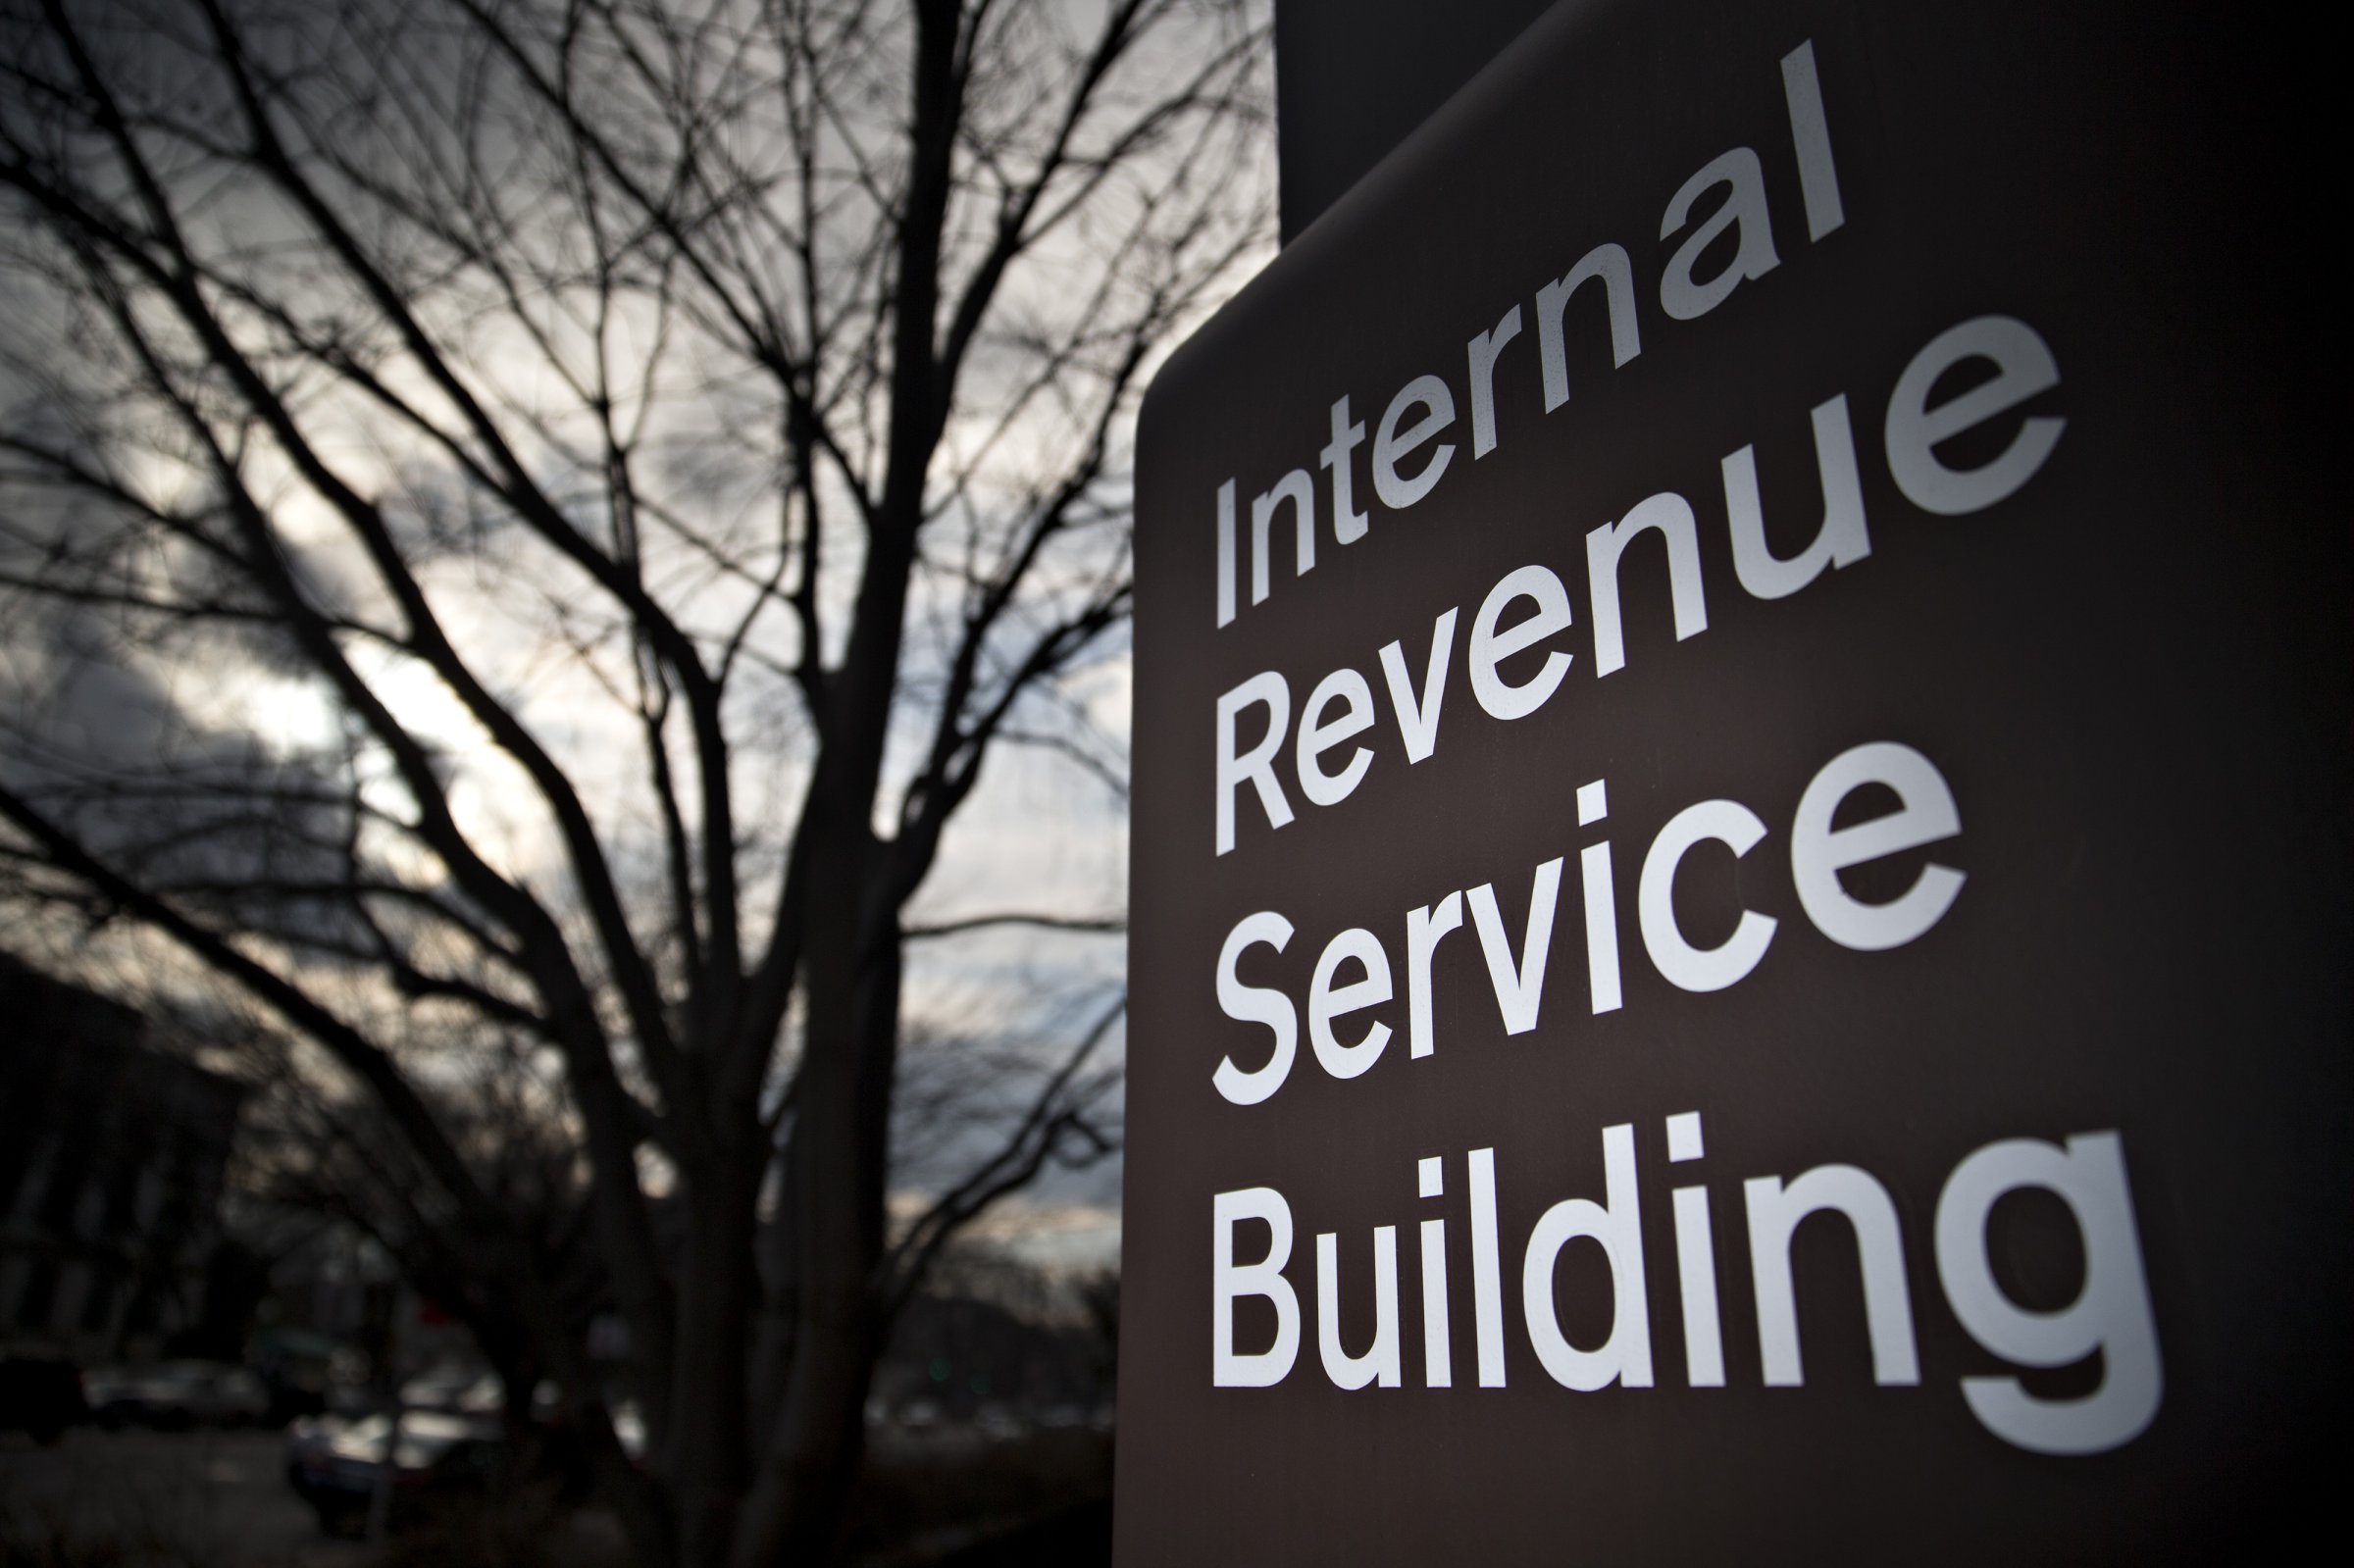 Signage for the Internal Revenue Service (IRS) stands outside the IRS headquarters building in Washington, D.C., U.S., on Wednesday, Feb. 17, 2016.